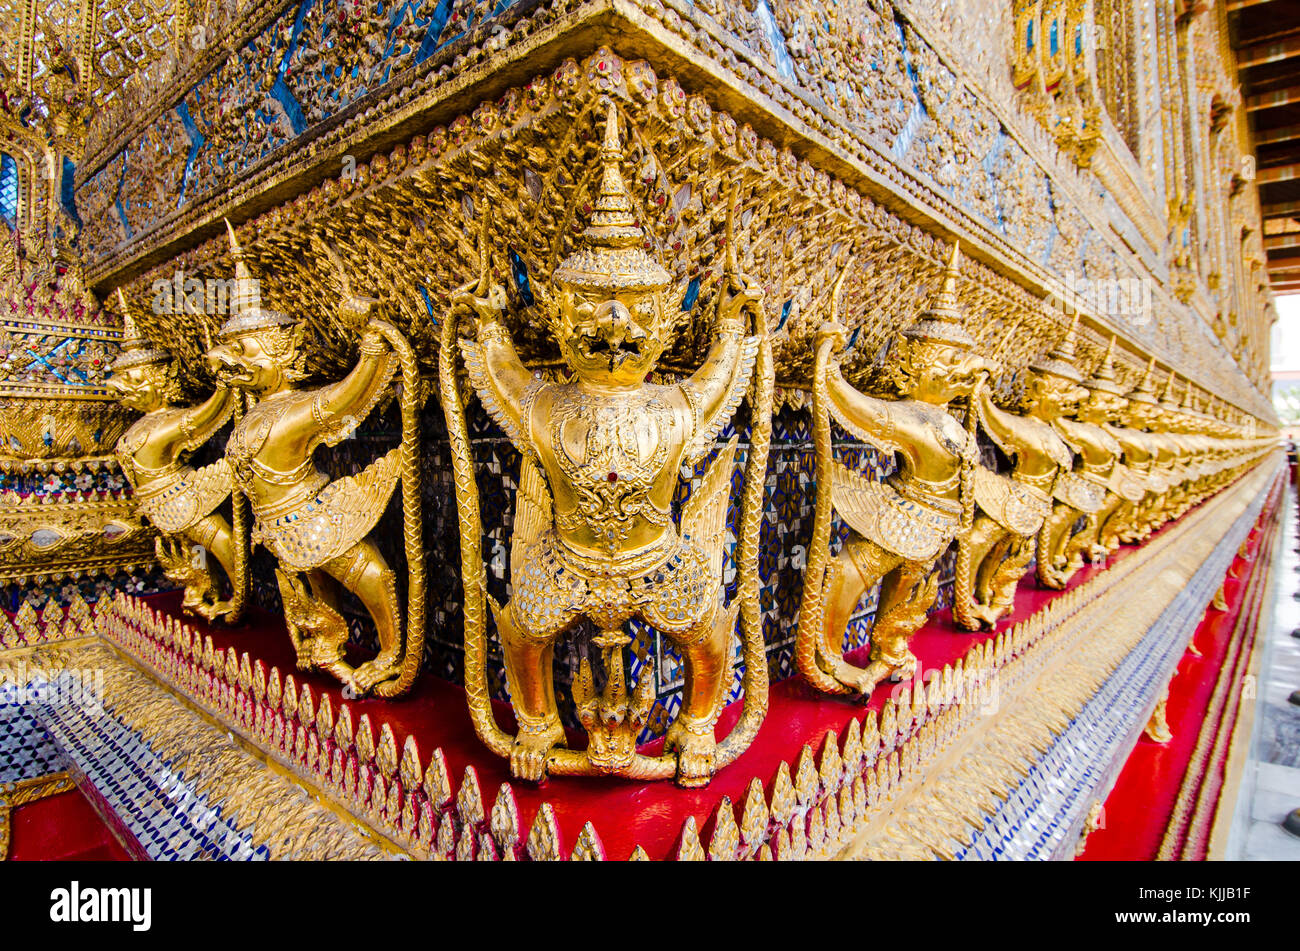 Along the inner walls of the Bangkok Palace complex Wat Phra Kaew temple, a frieze of gilded Garudas hold the Naga snakes to protect the temple. Stock Photo